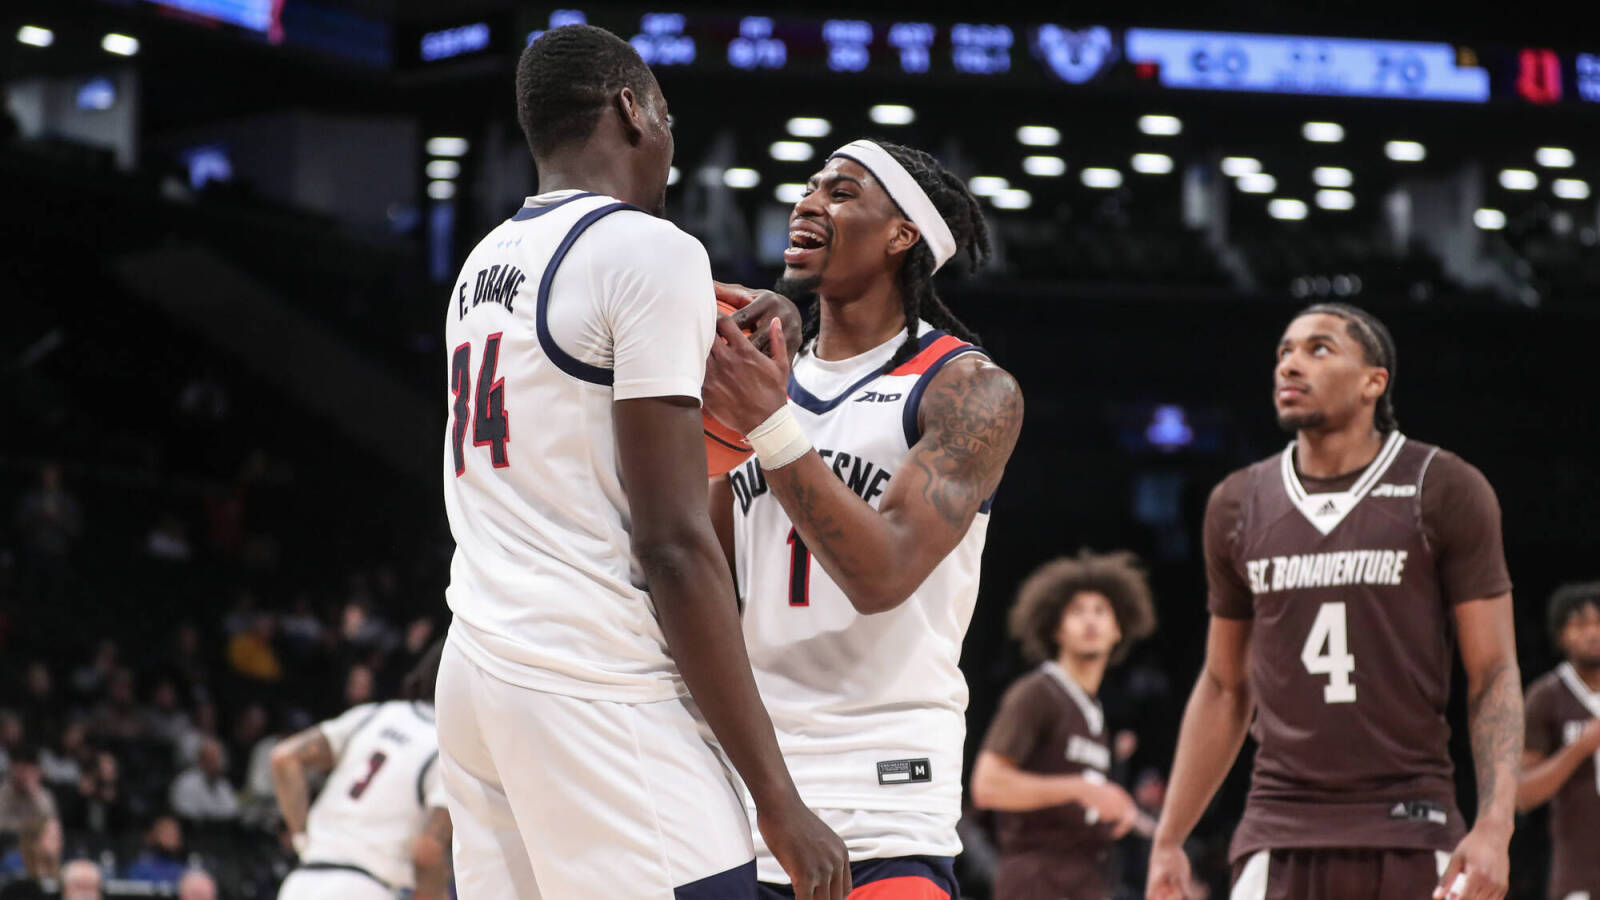 Duquesne Dukes on Verge of Breaking NCAA Tournament Drought After 47 Years